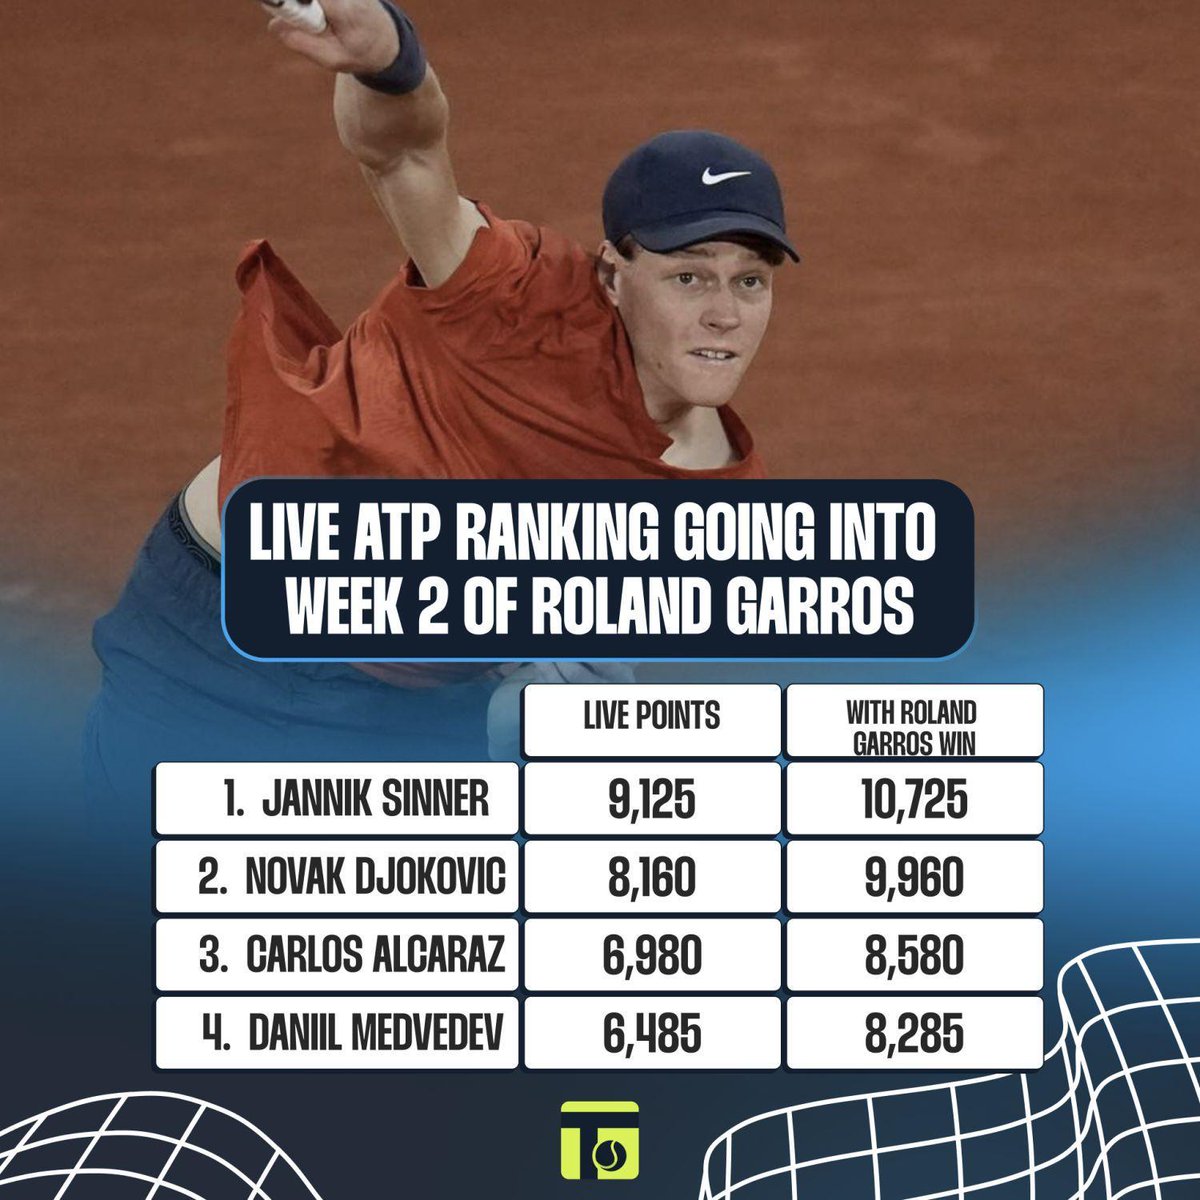 Race to finish the French Open as world No 1 after the French Open. Jannik Sinner in pole position #RolandGarros #tennis